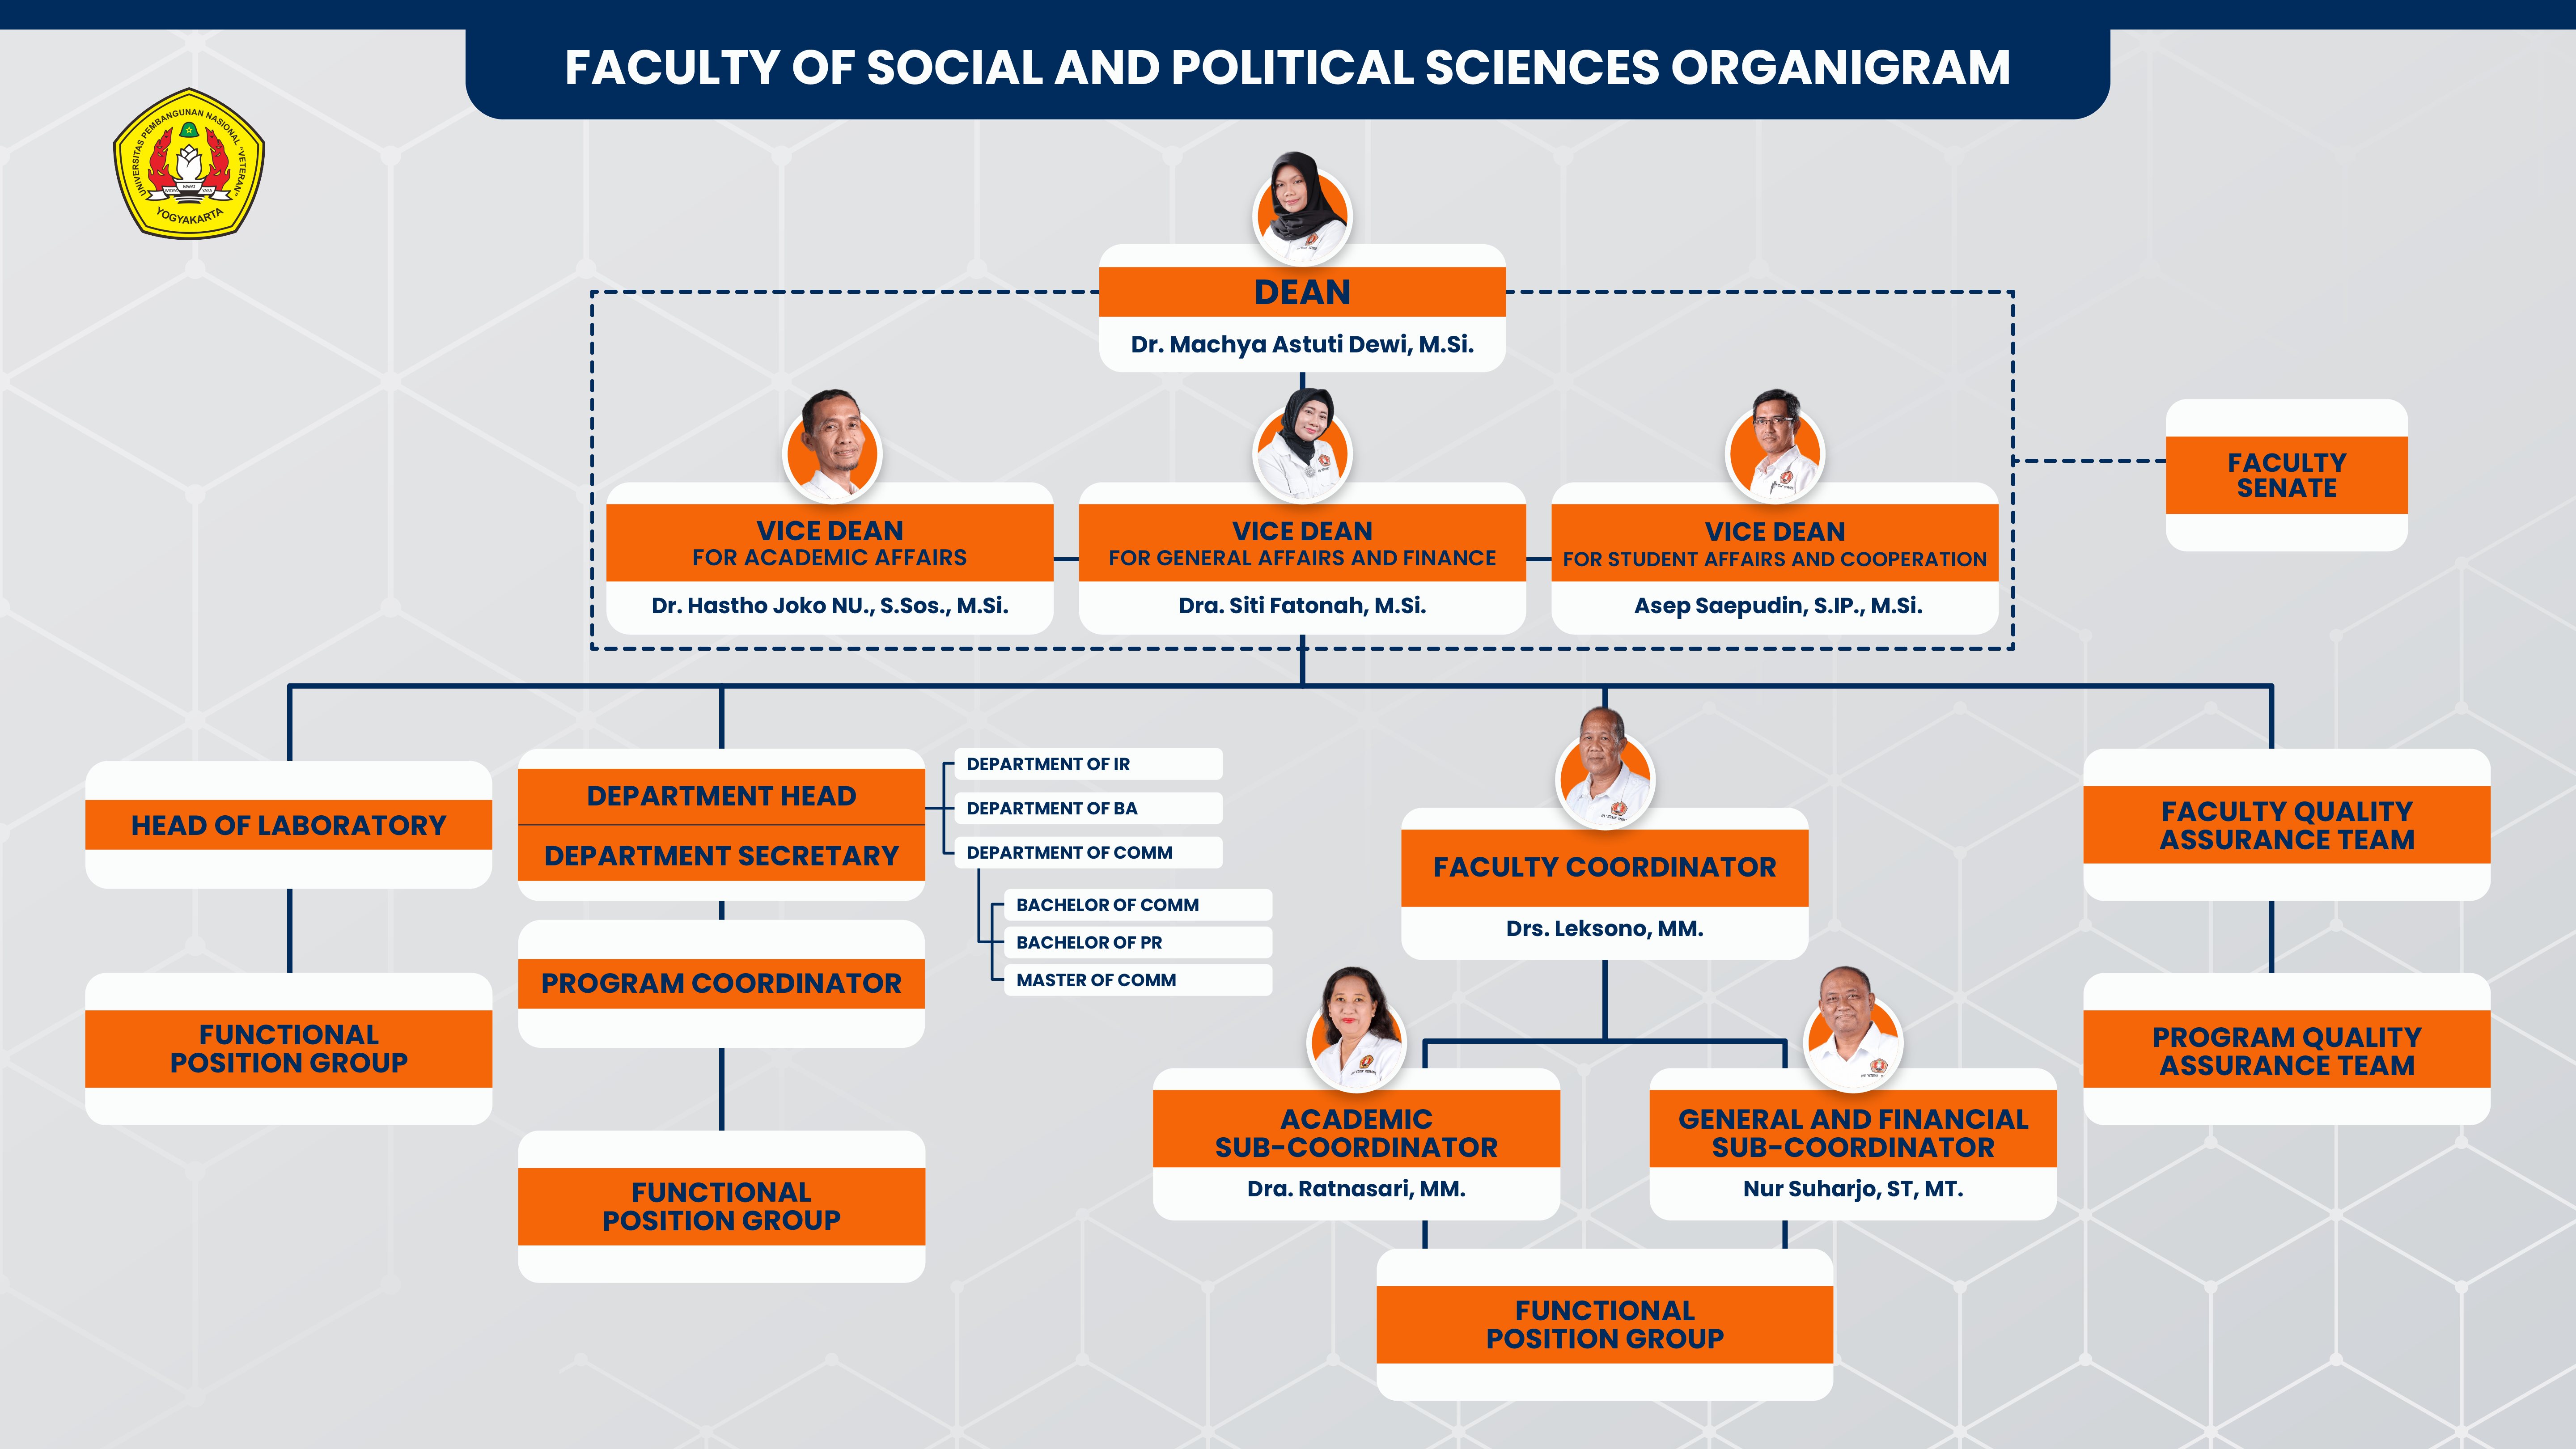 Organization Structure of the Faculty